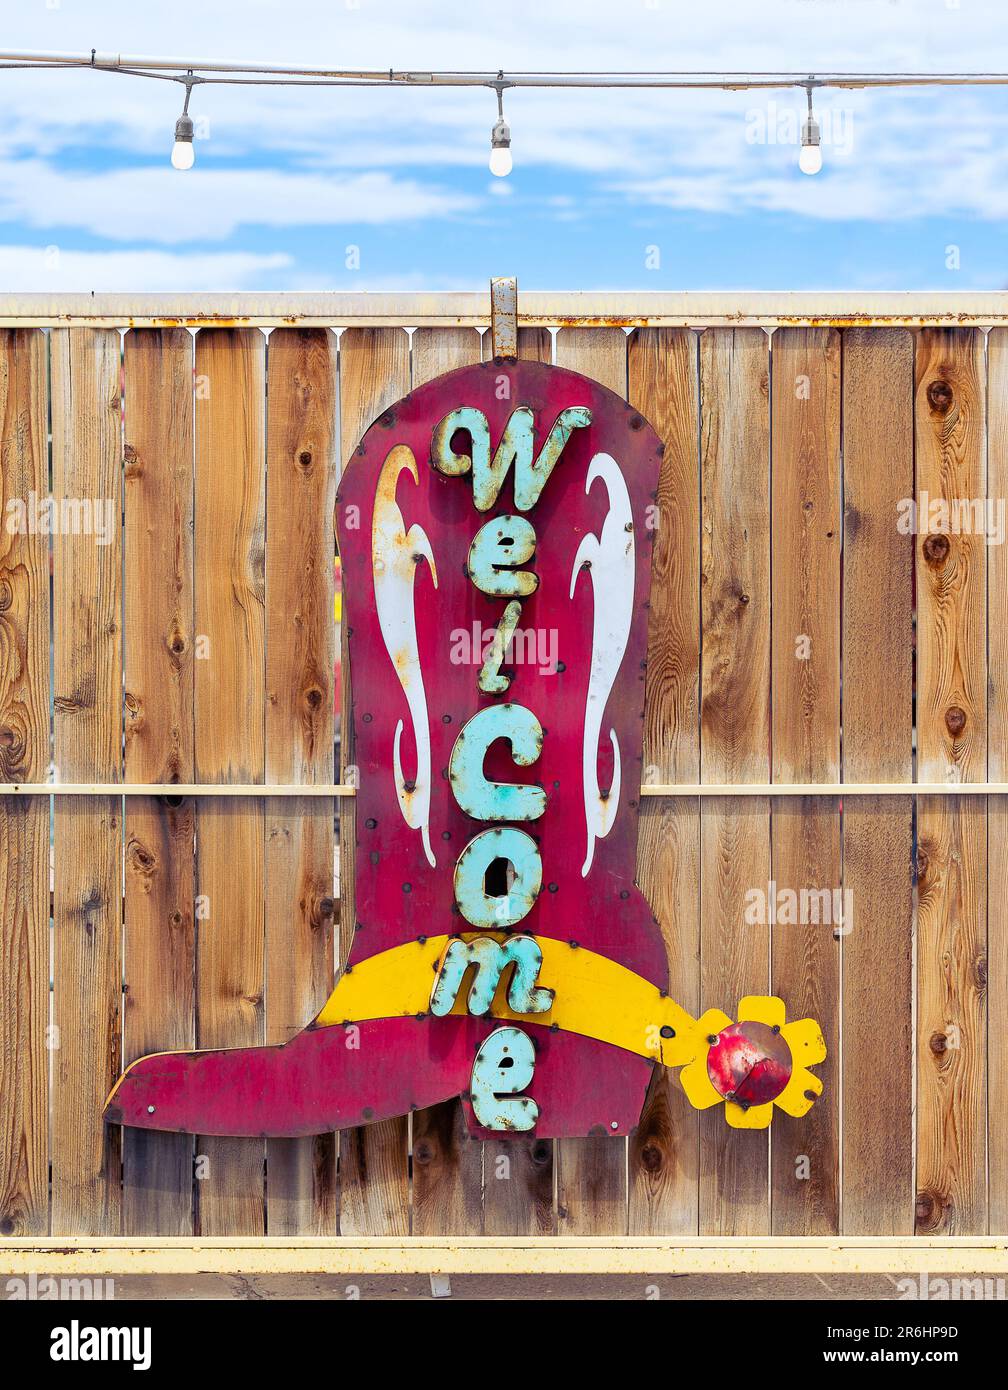 Cactus Flower, Spanish Bell Tower, Organ Mountains, Fire Hydrant, Stucco Columns and Shadows, Cowboy Boot Welcome Sign Stock Photo